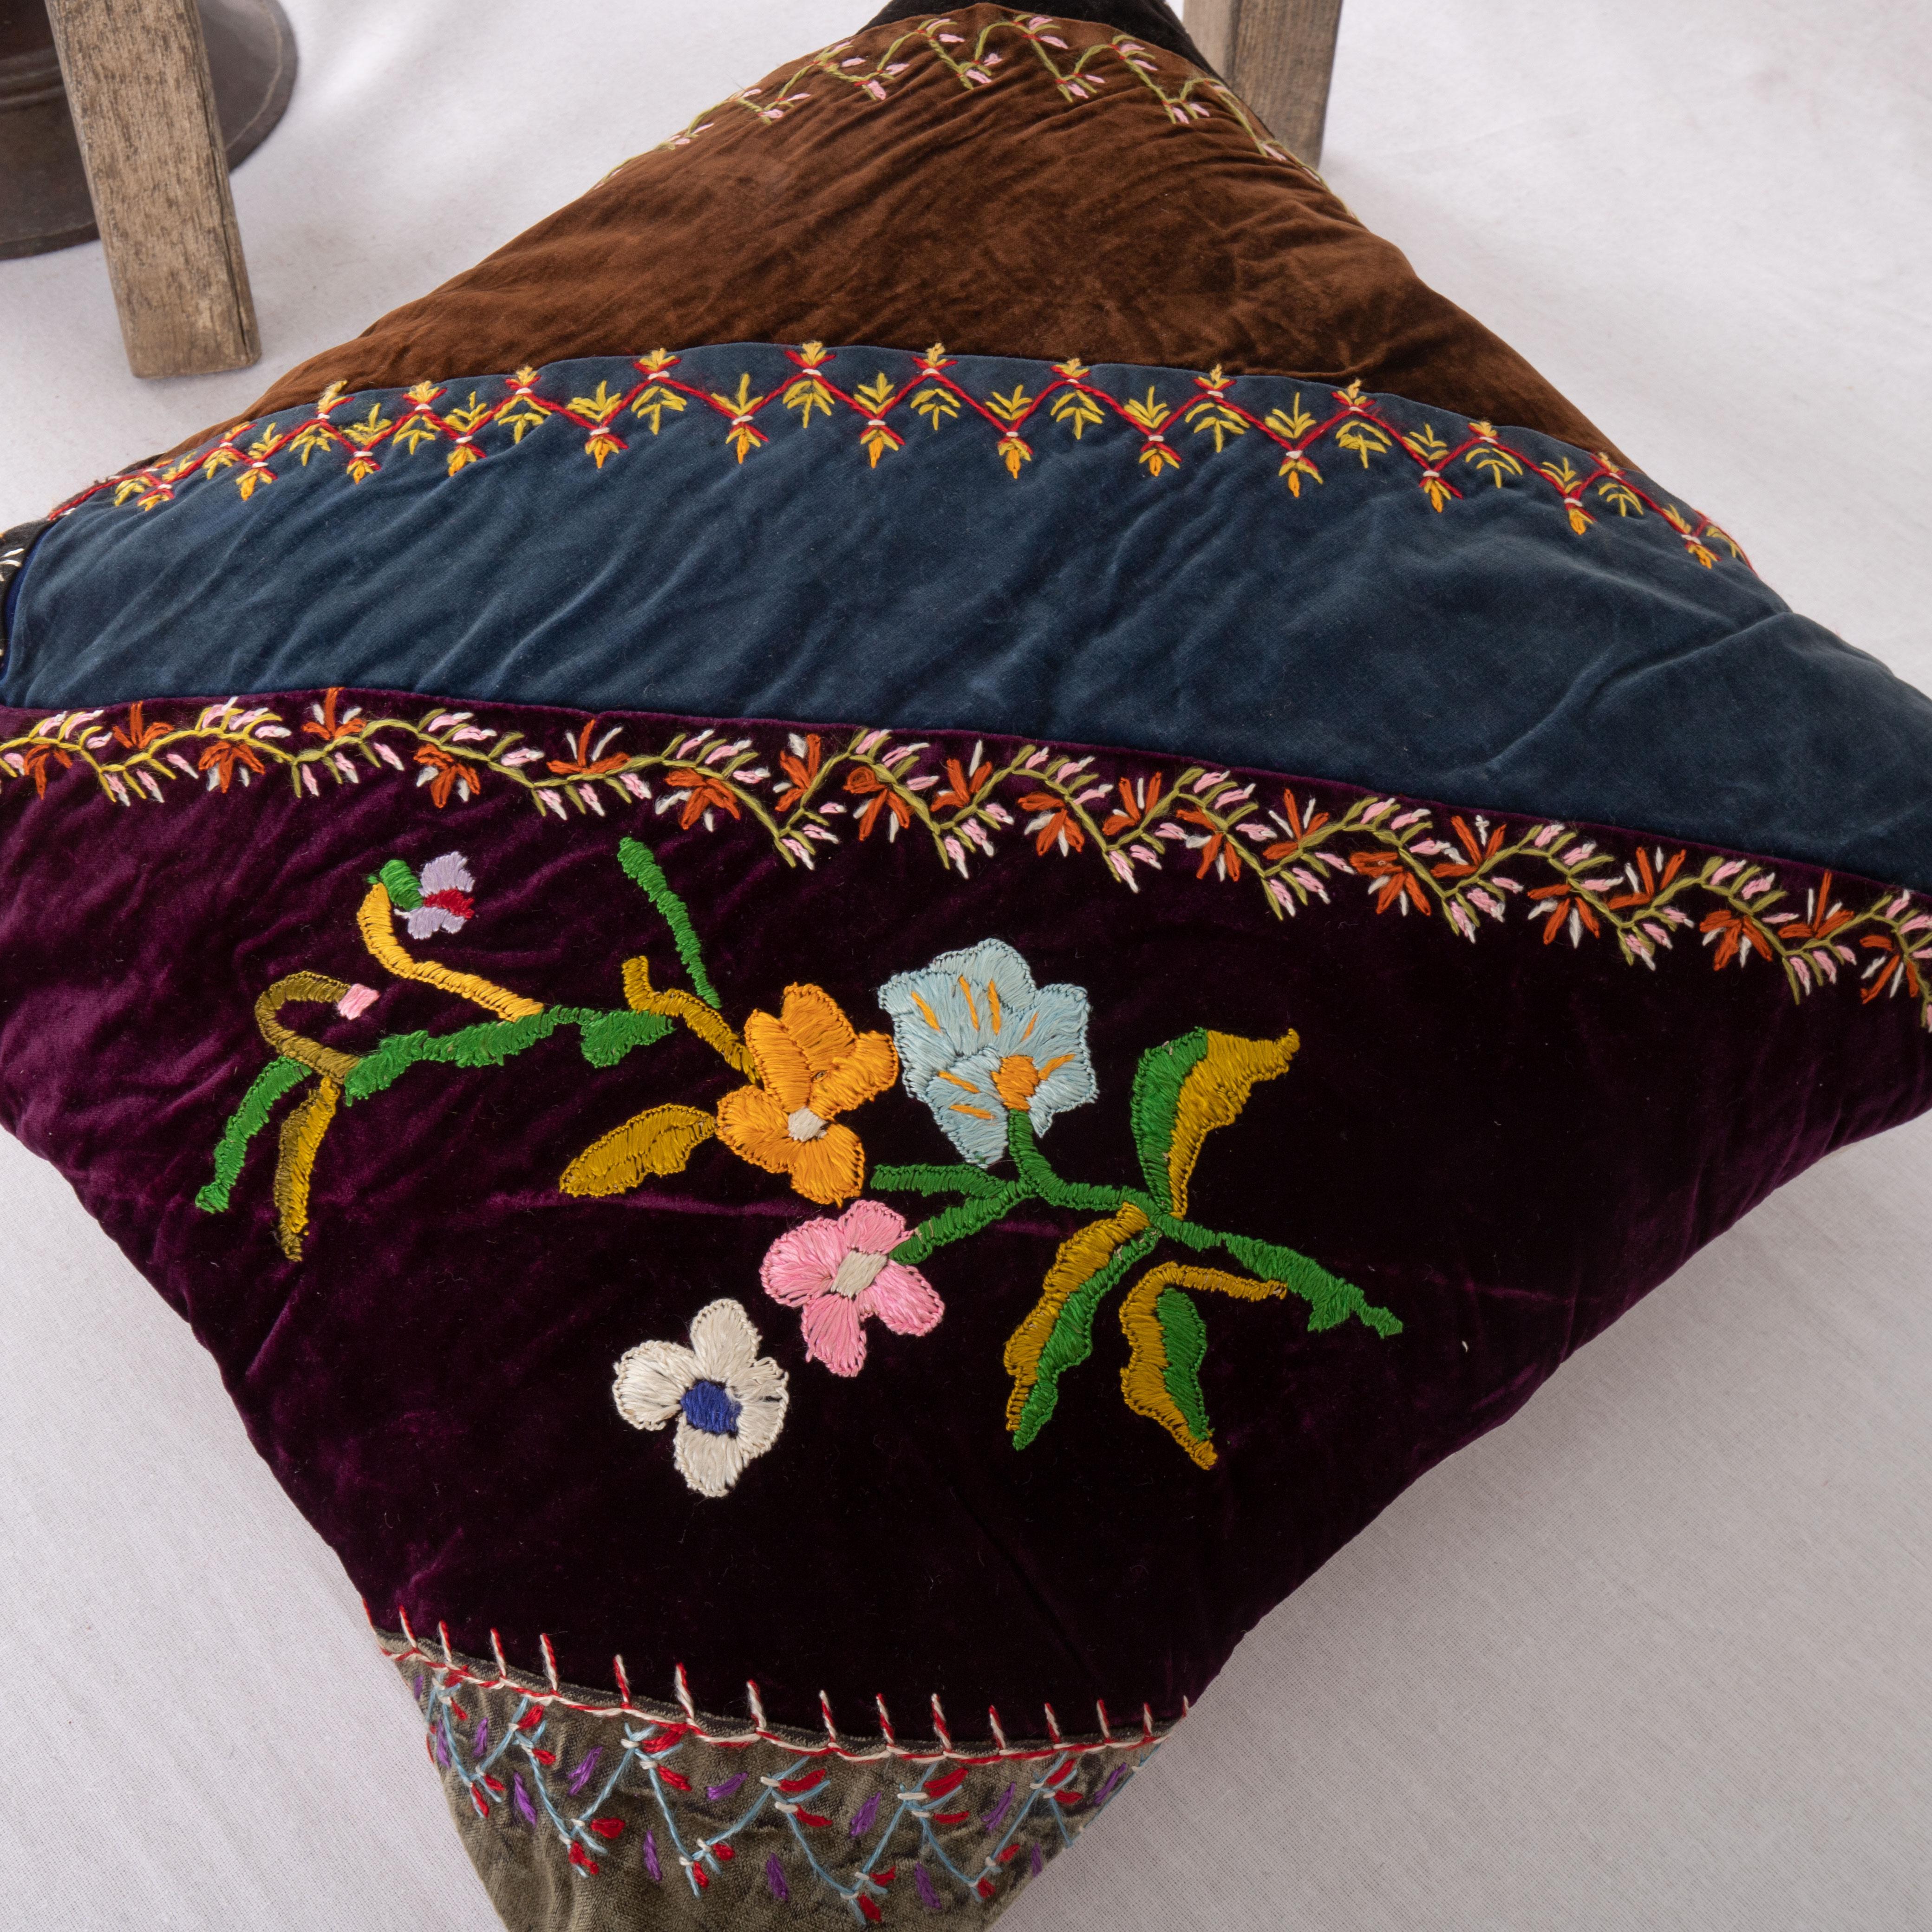 Antique American Crazy Quilt Pillow Cover, Early 20th C In Good Condition For Sale In Istanbul, TR